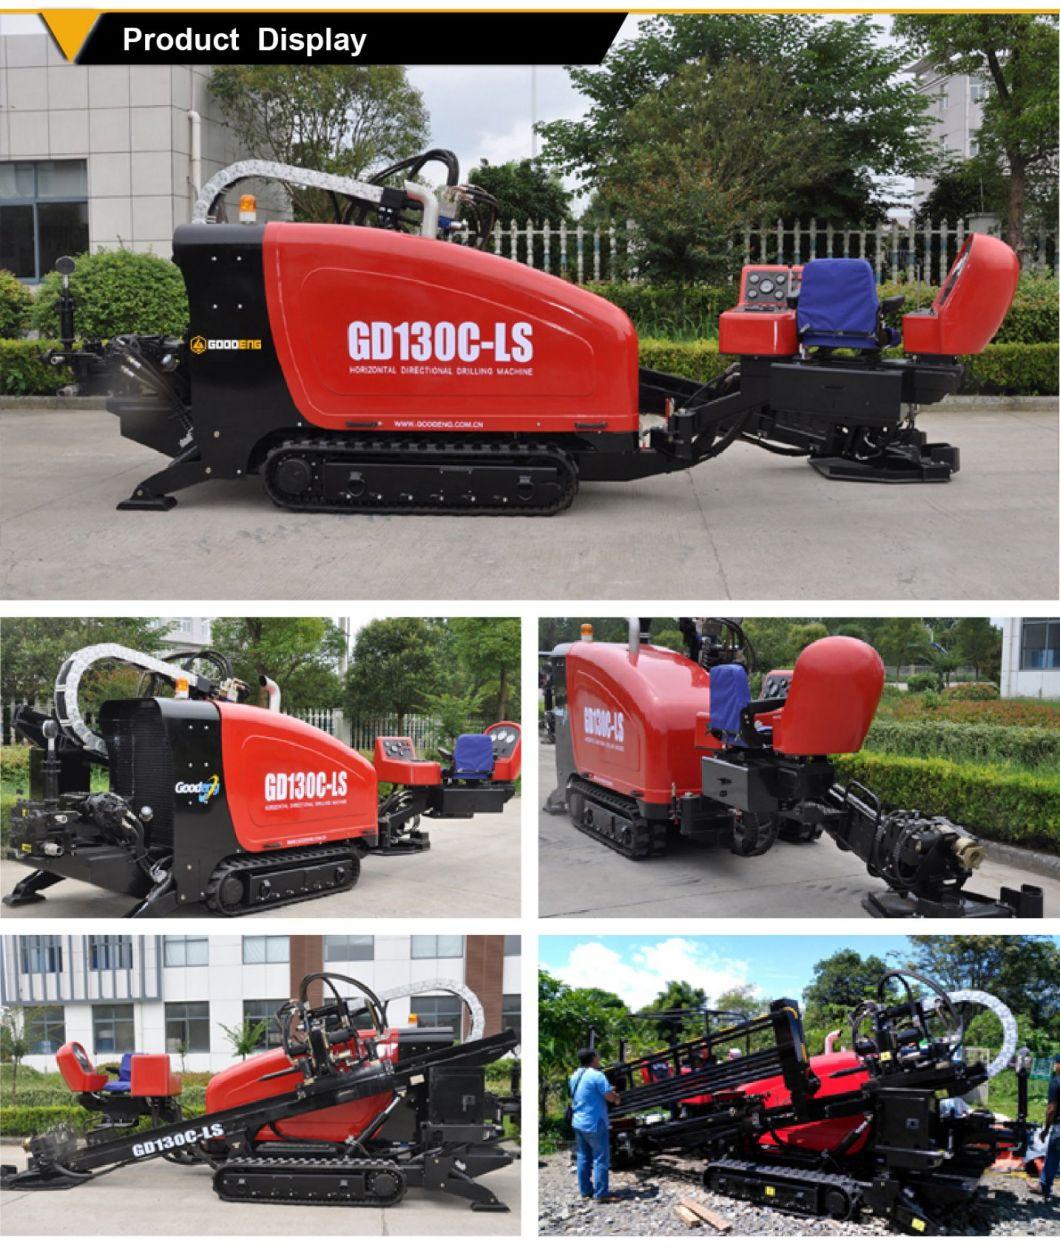 Goodeng small series horizontal directional drilling rig GD130C-LS